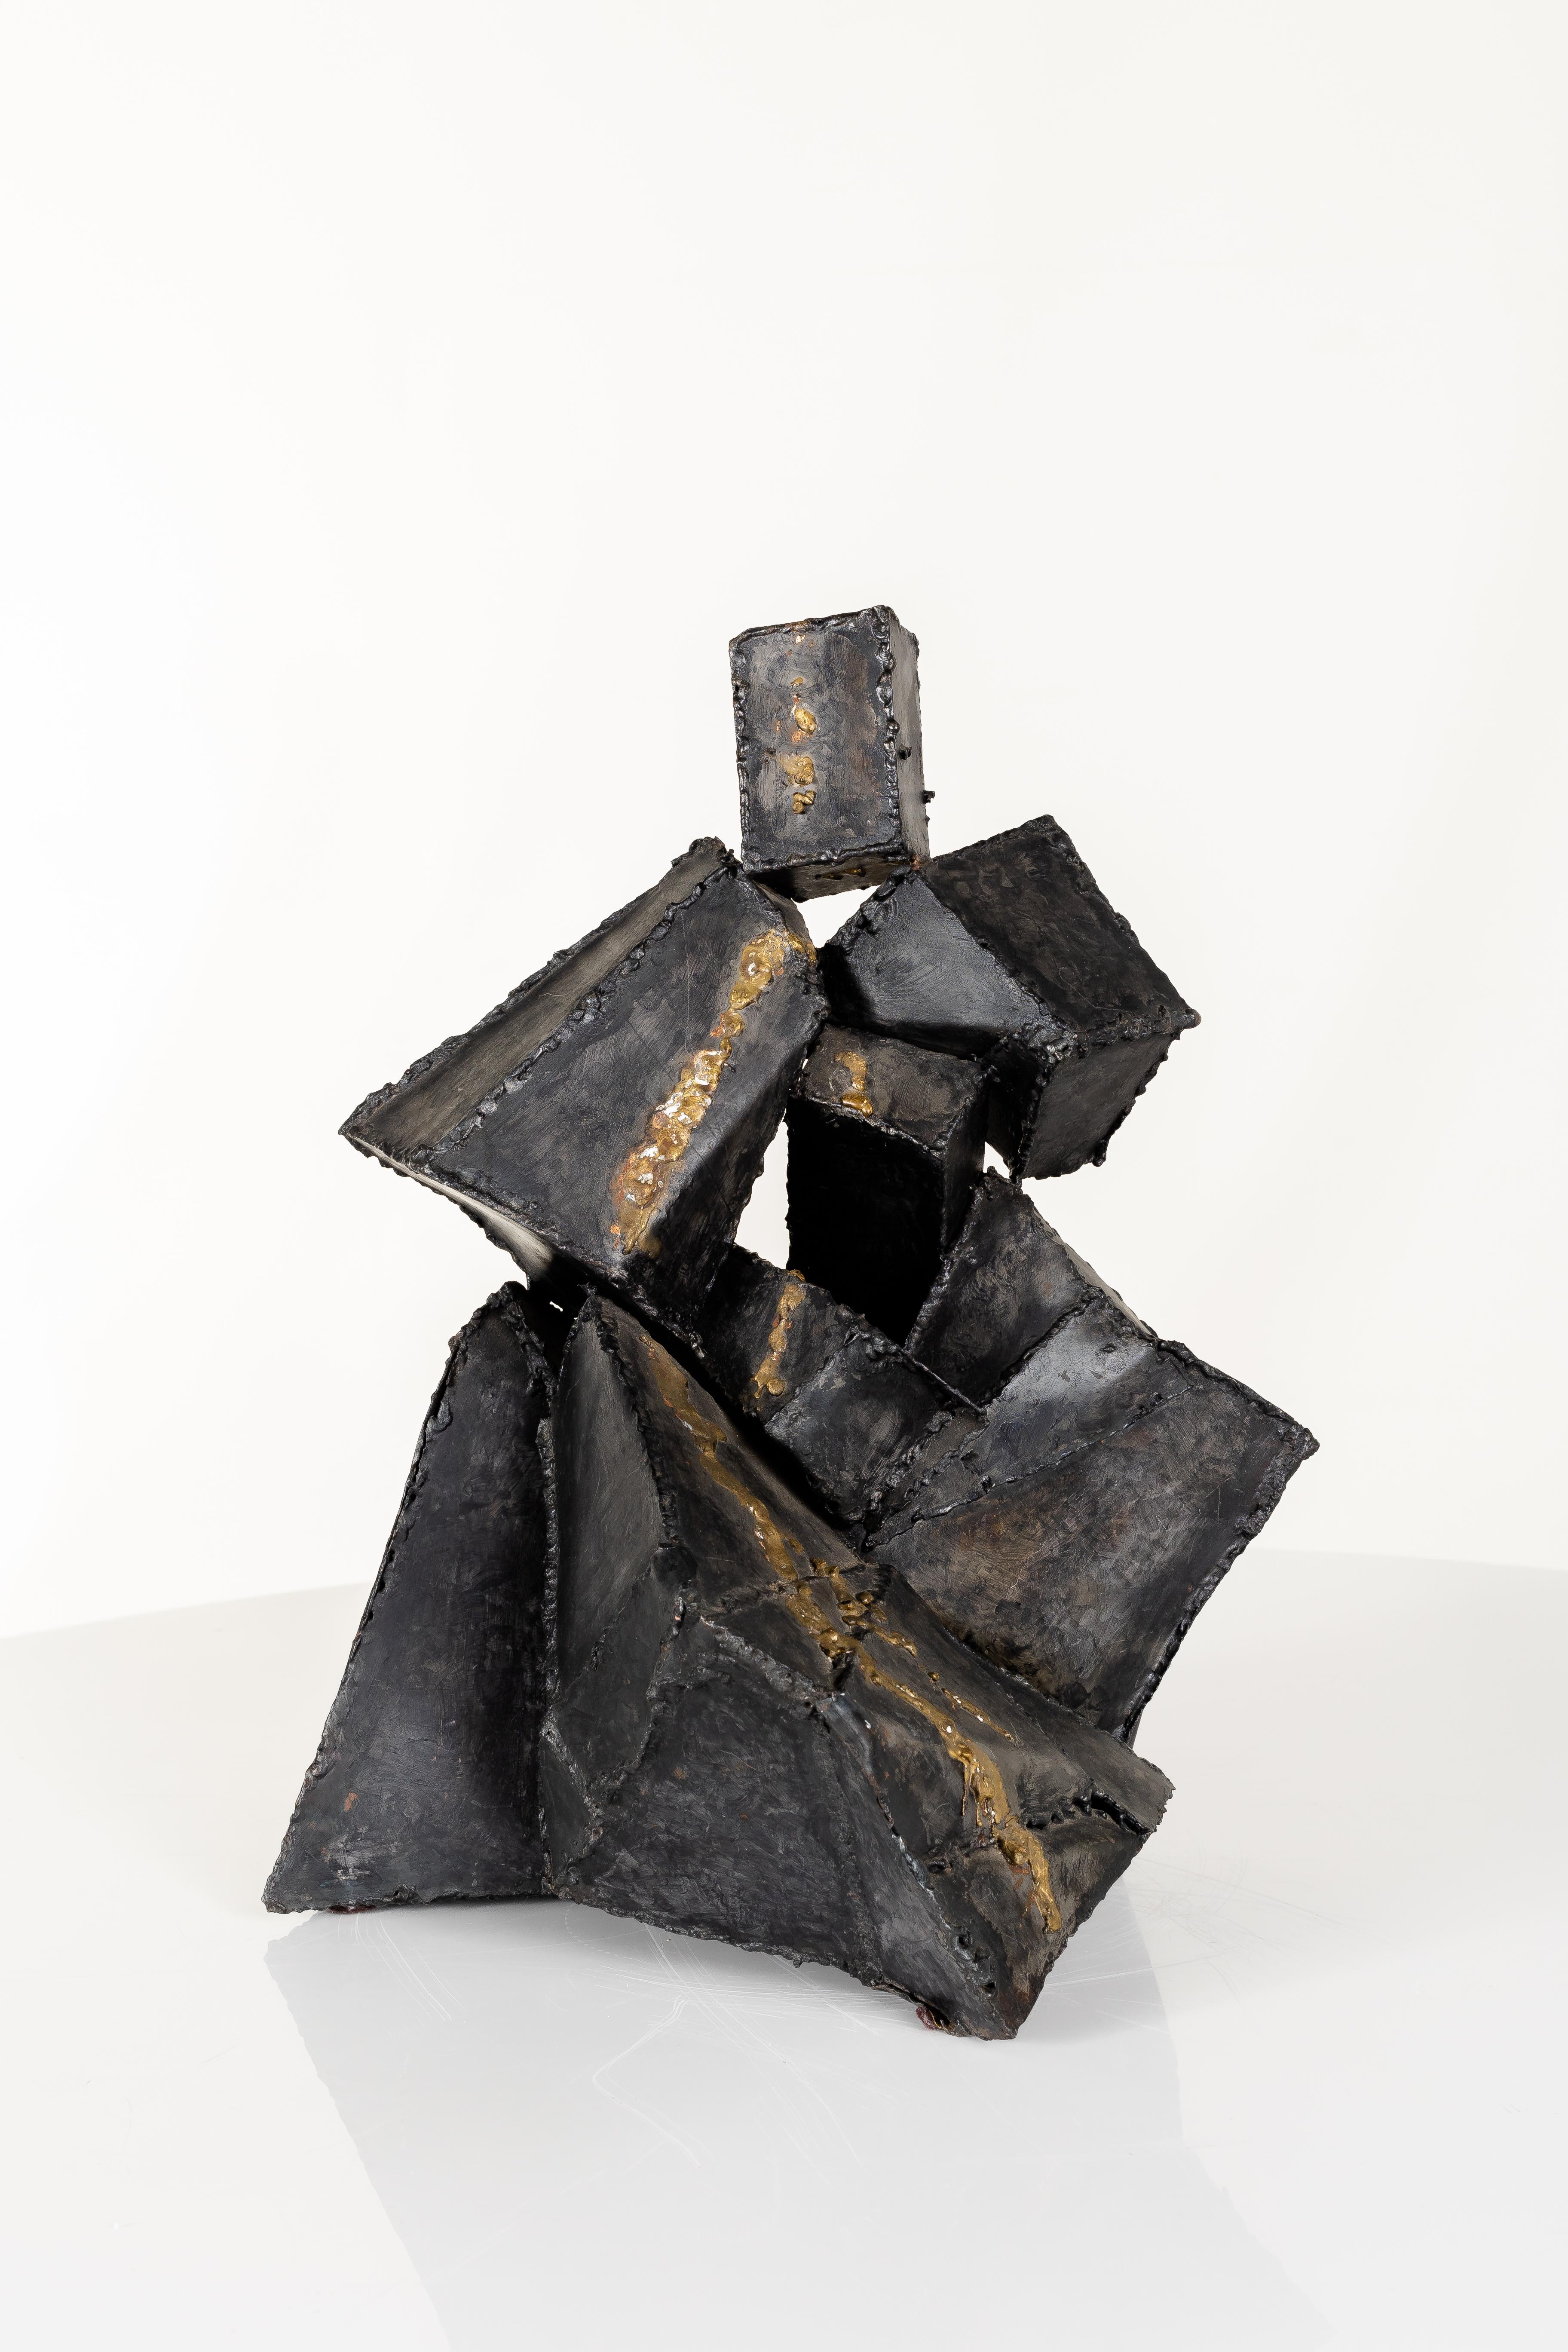 Contemporary Brutalist Abstract Sculpture by Thea Wisser